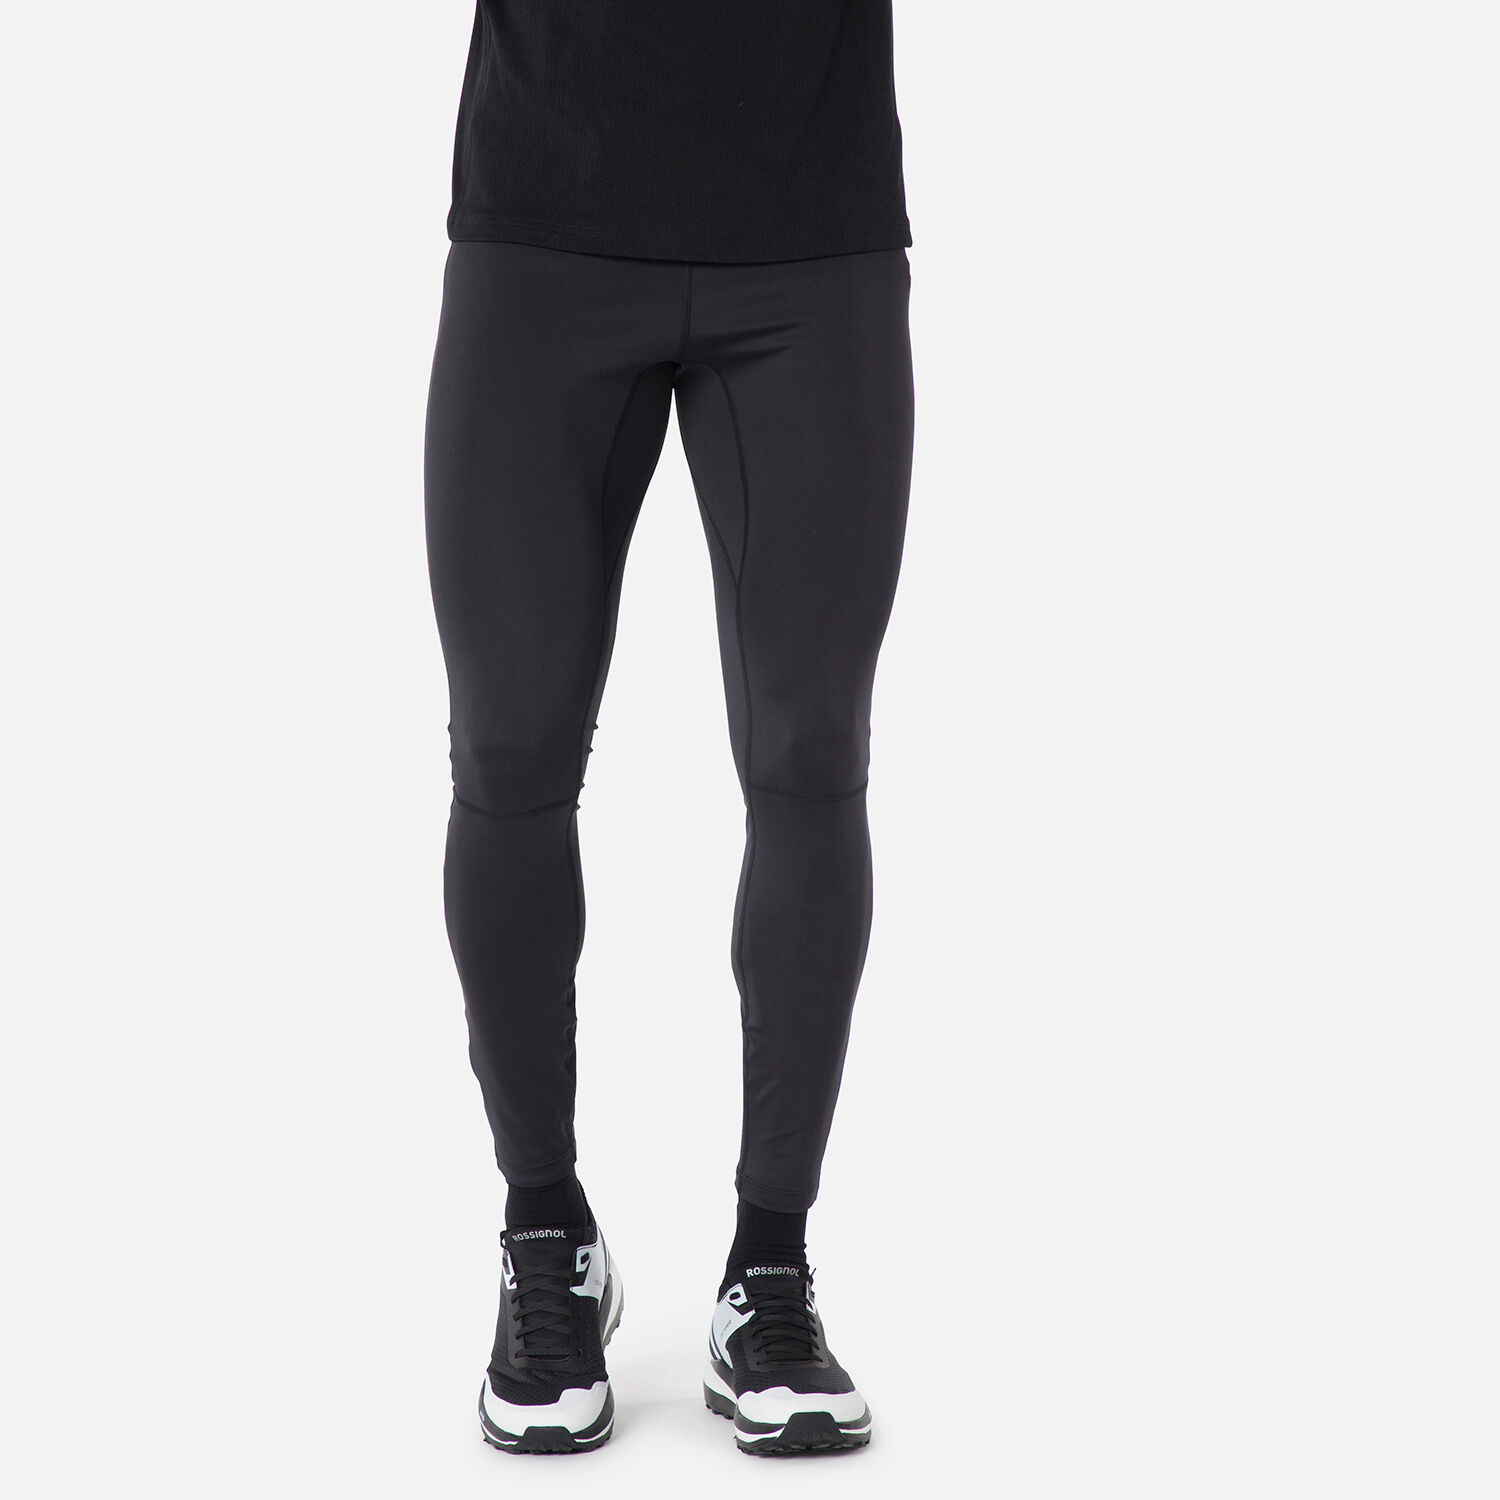 Buy XXS_6XL Men's Compression Leggings High Stretch Men's Breathable Tights  for Men Quick-dry Leggings for Running, Sports Digital PDF Online in India  - Etsy